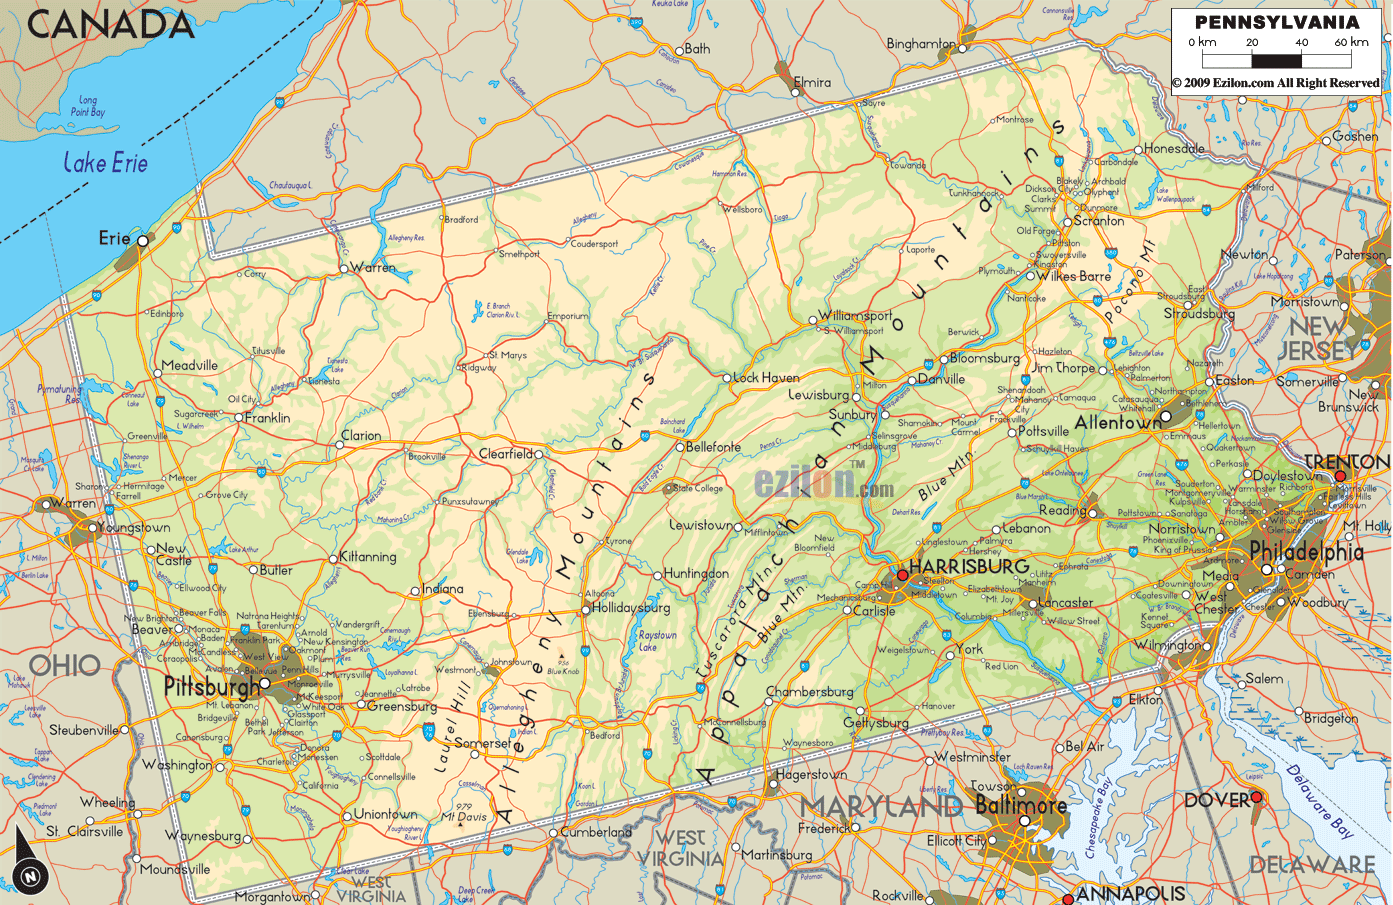 Physical map of Pennsylvania State, USA showing major geographical features such as rivers, lakes, mountains, topography and land formations.